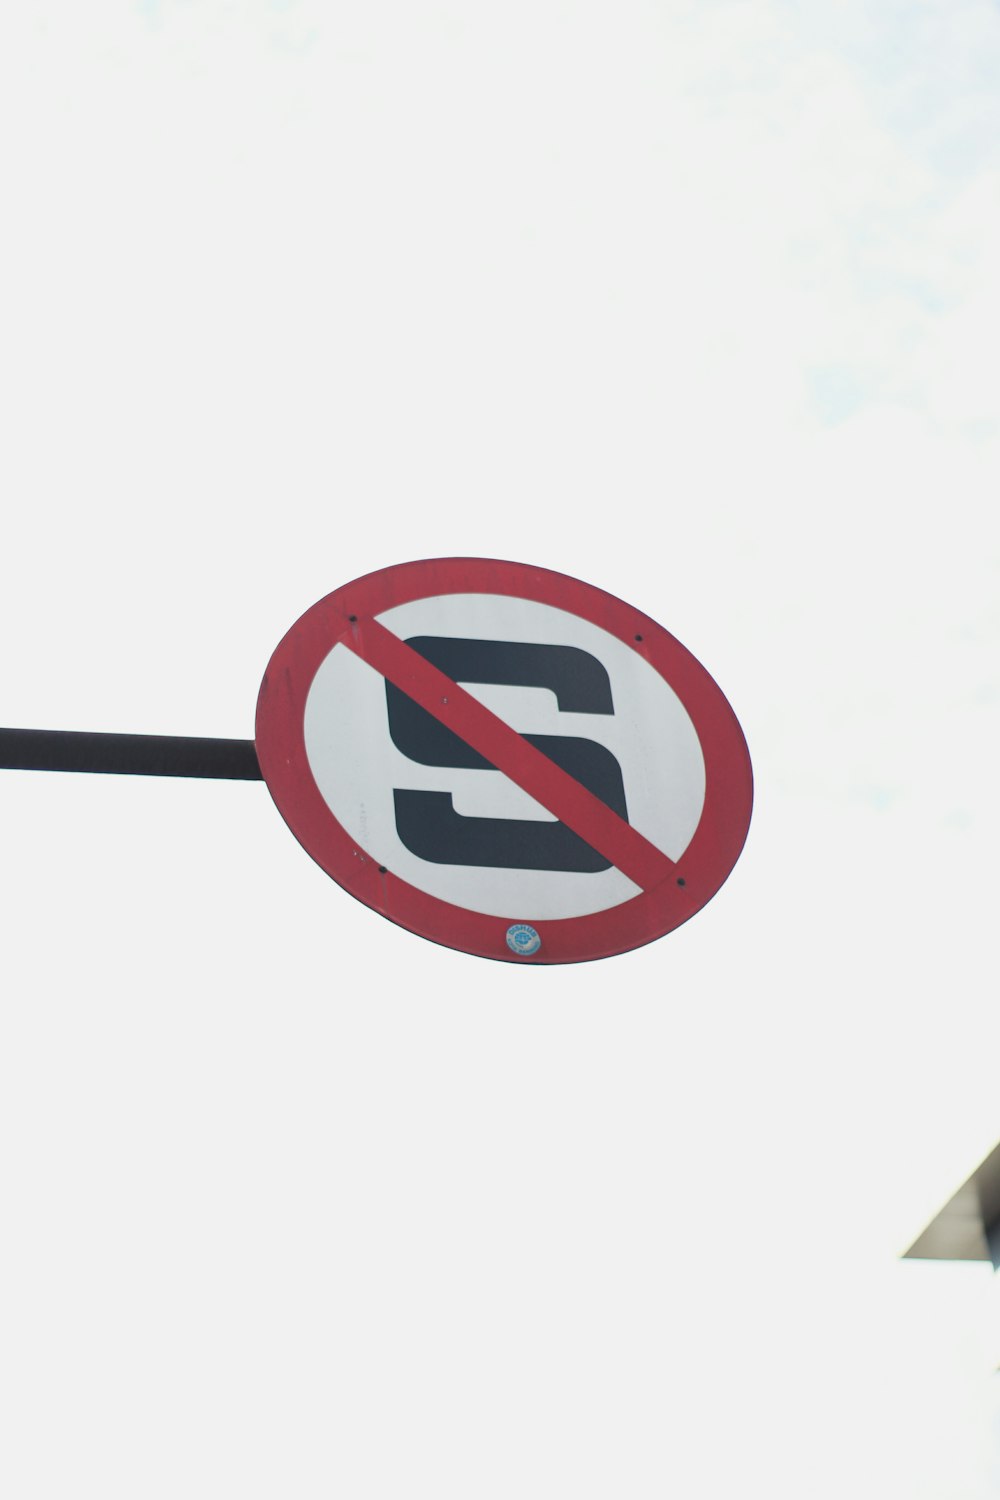 a no parking sign hanging off the side of a pole